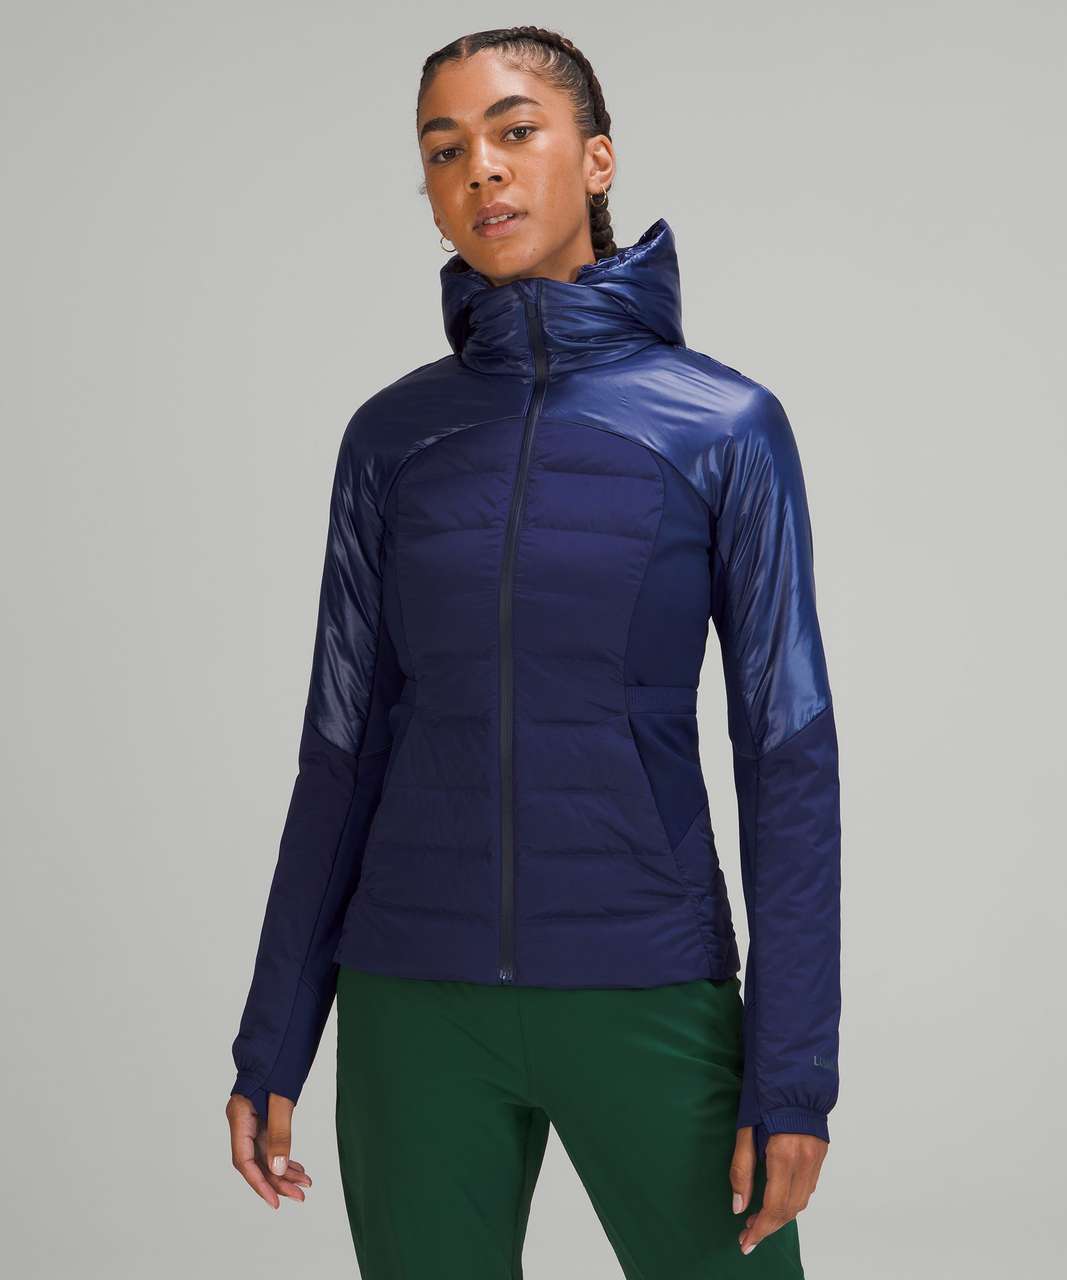 Deck Your Run In Warmth With The Wonderful lululemon Down For It